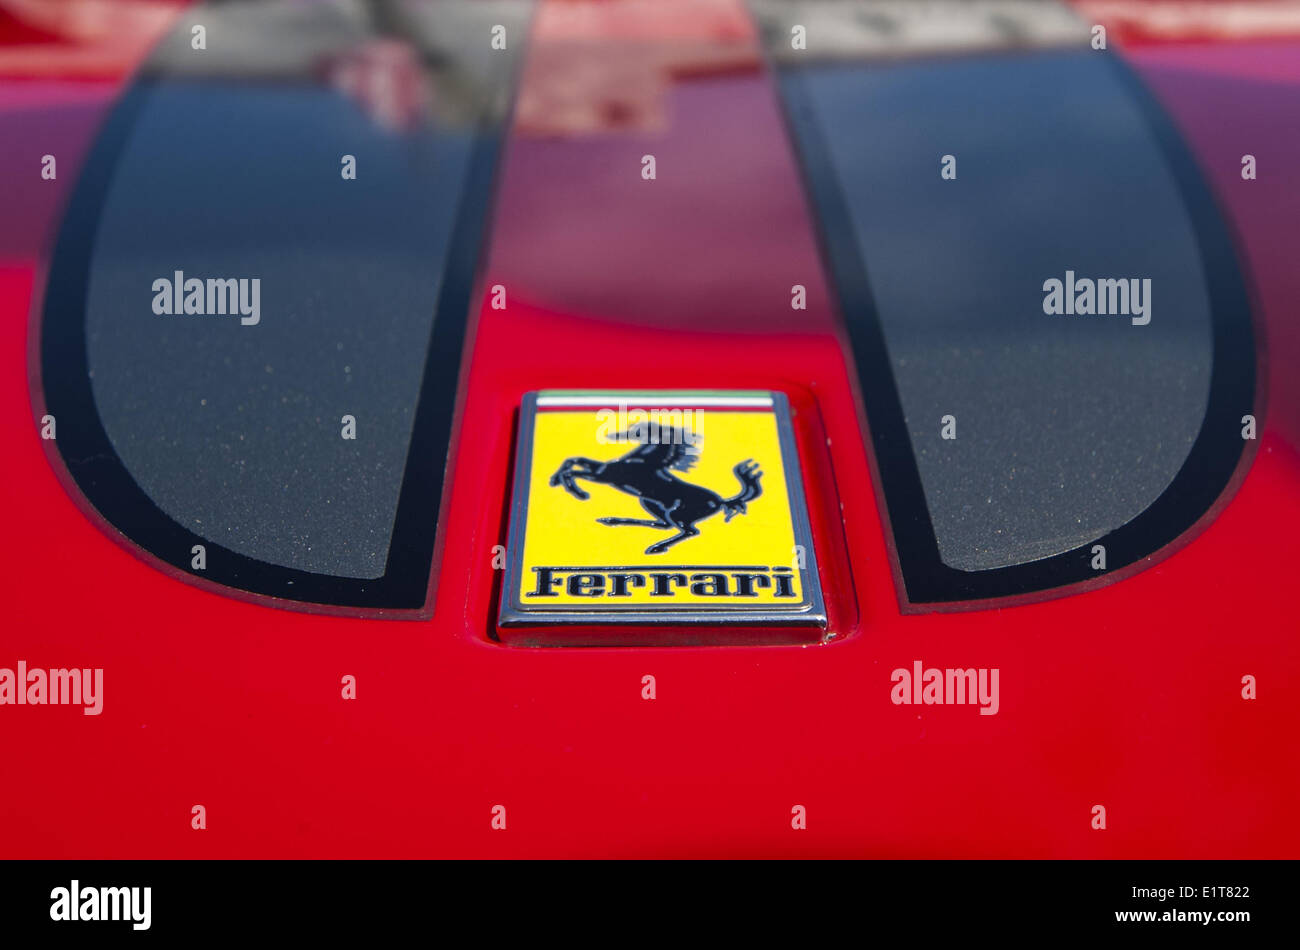 San Clemente, California, USA. 8th June, 2014. A traditional Ferrari emblem detail on the hood of a red Ferrari. The 19th Annual 2014 San Clemente Car Show featuring new and old classic and exotic cars and trucks took over the downtown along Avenida Del Mar on Sunday, June 8, 2014. The one day event brings car collectors and enthusiasts from all over southern California. Credit:  David Bro/ZUMAPRESS.com/Alamy Live News Stock Photo